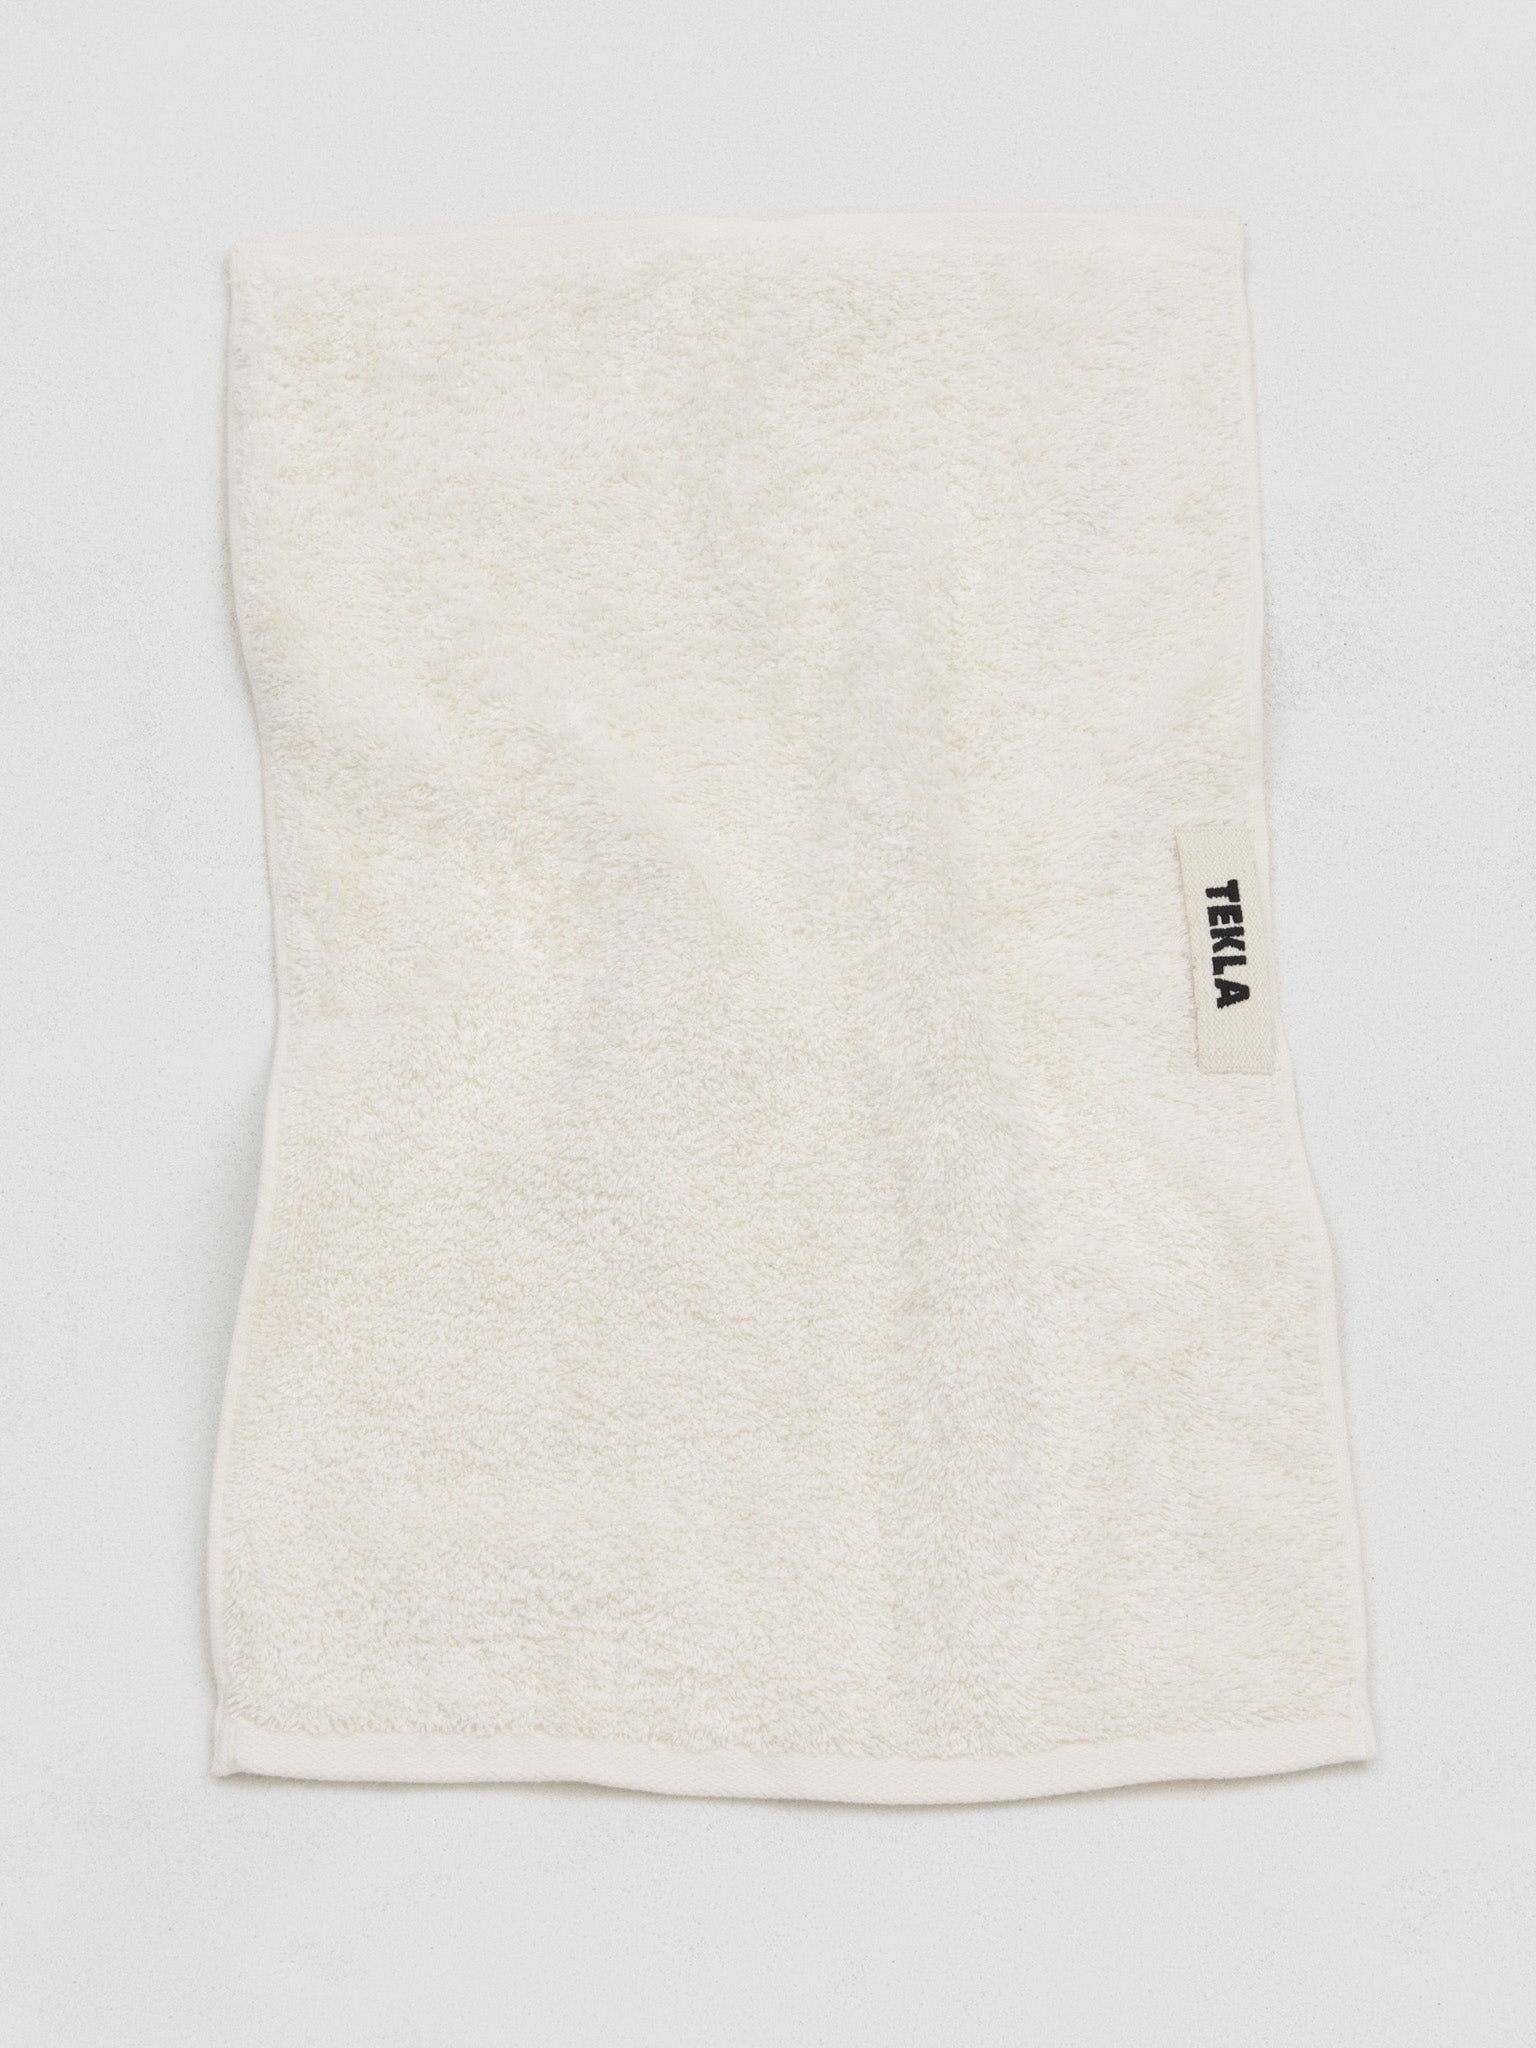 Guest Towel in Ivory